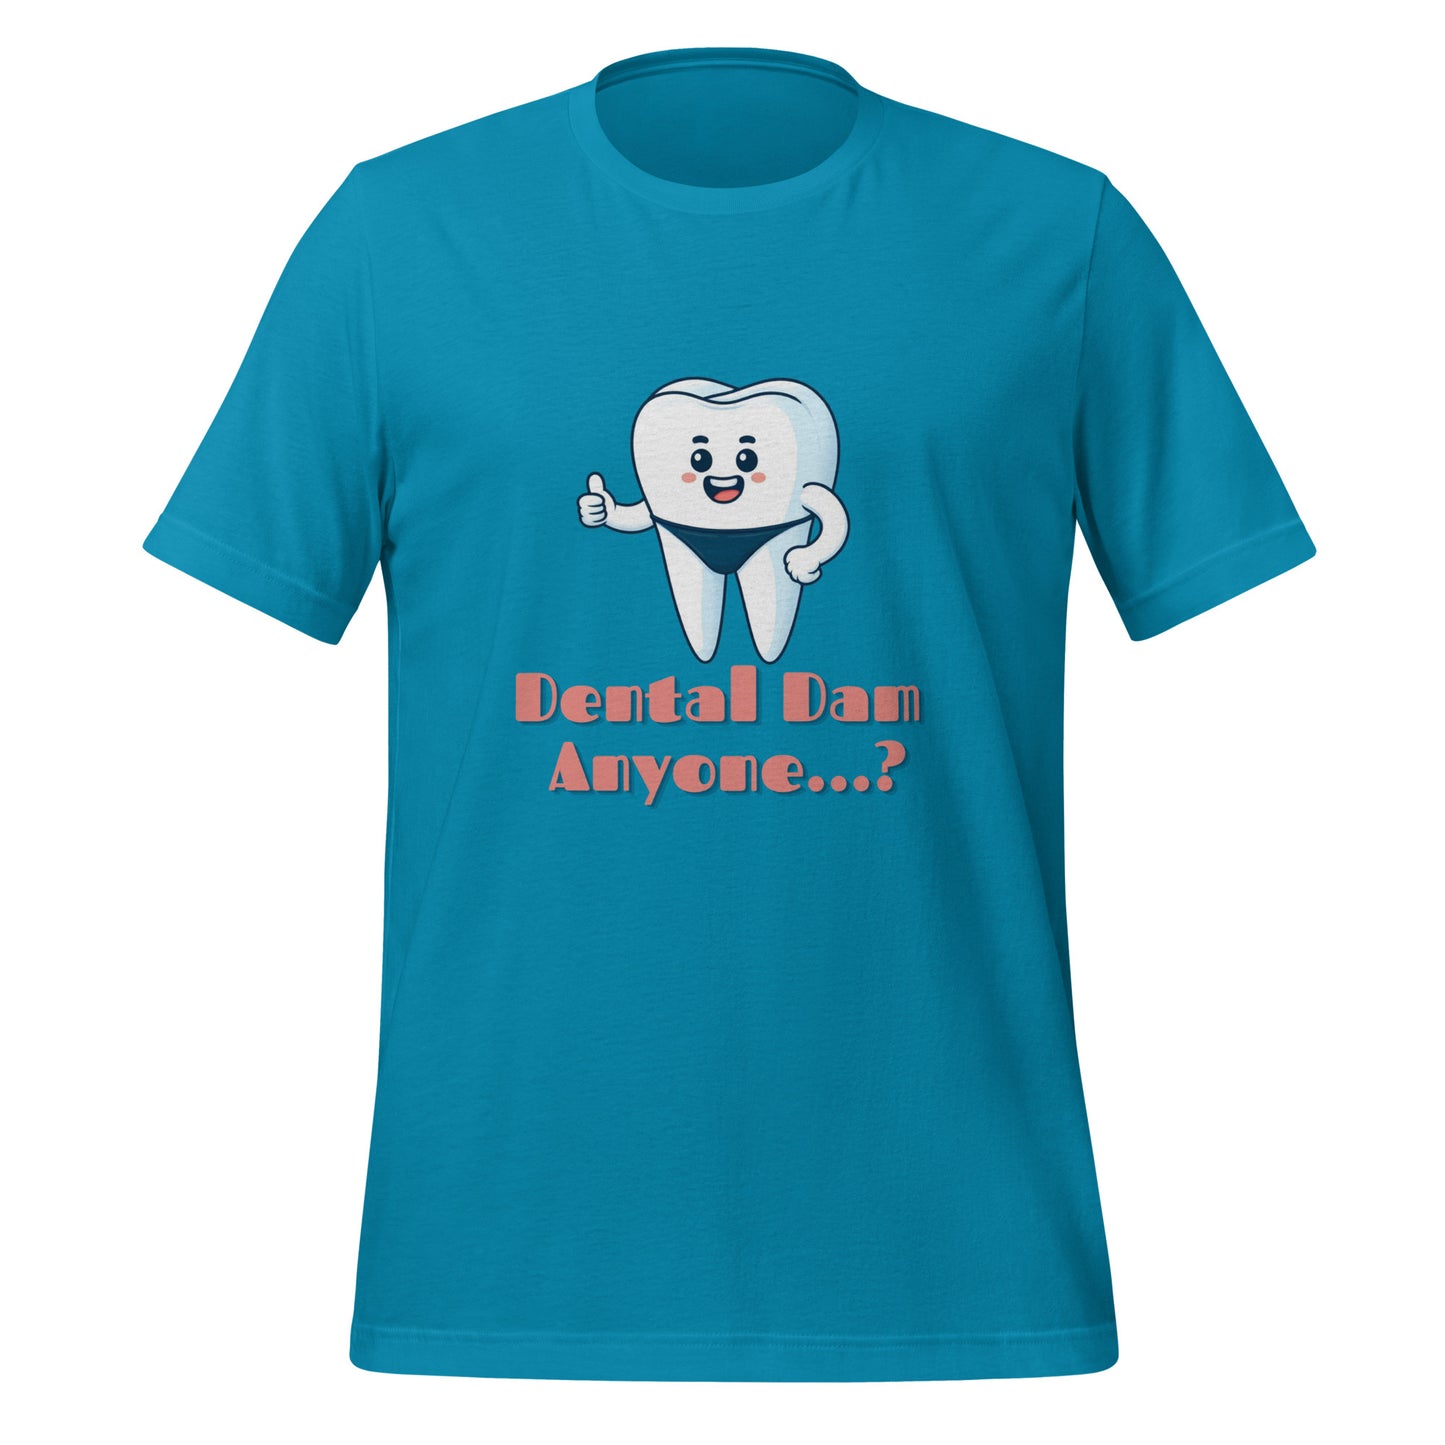 Funny dental shirt featuring a playful tooth character in a speedo with the text ‘Dental Dam Anyone?’, perfect for dentists, dental hygienists, and dental students who enjoy dental humor. This dental shirt is a unique addition to any dental professional’s wardrobe, making it an ideal dental office shirt. Don’t miss out on our dental assistant shirts and dental hygiene shirts. Aqua color.